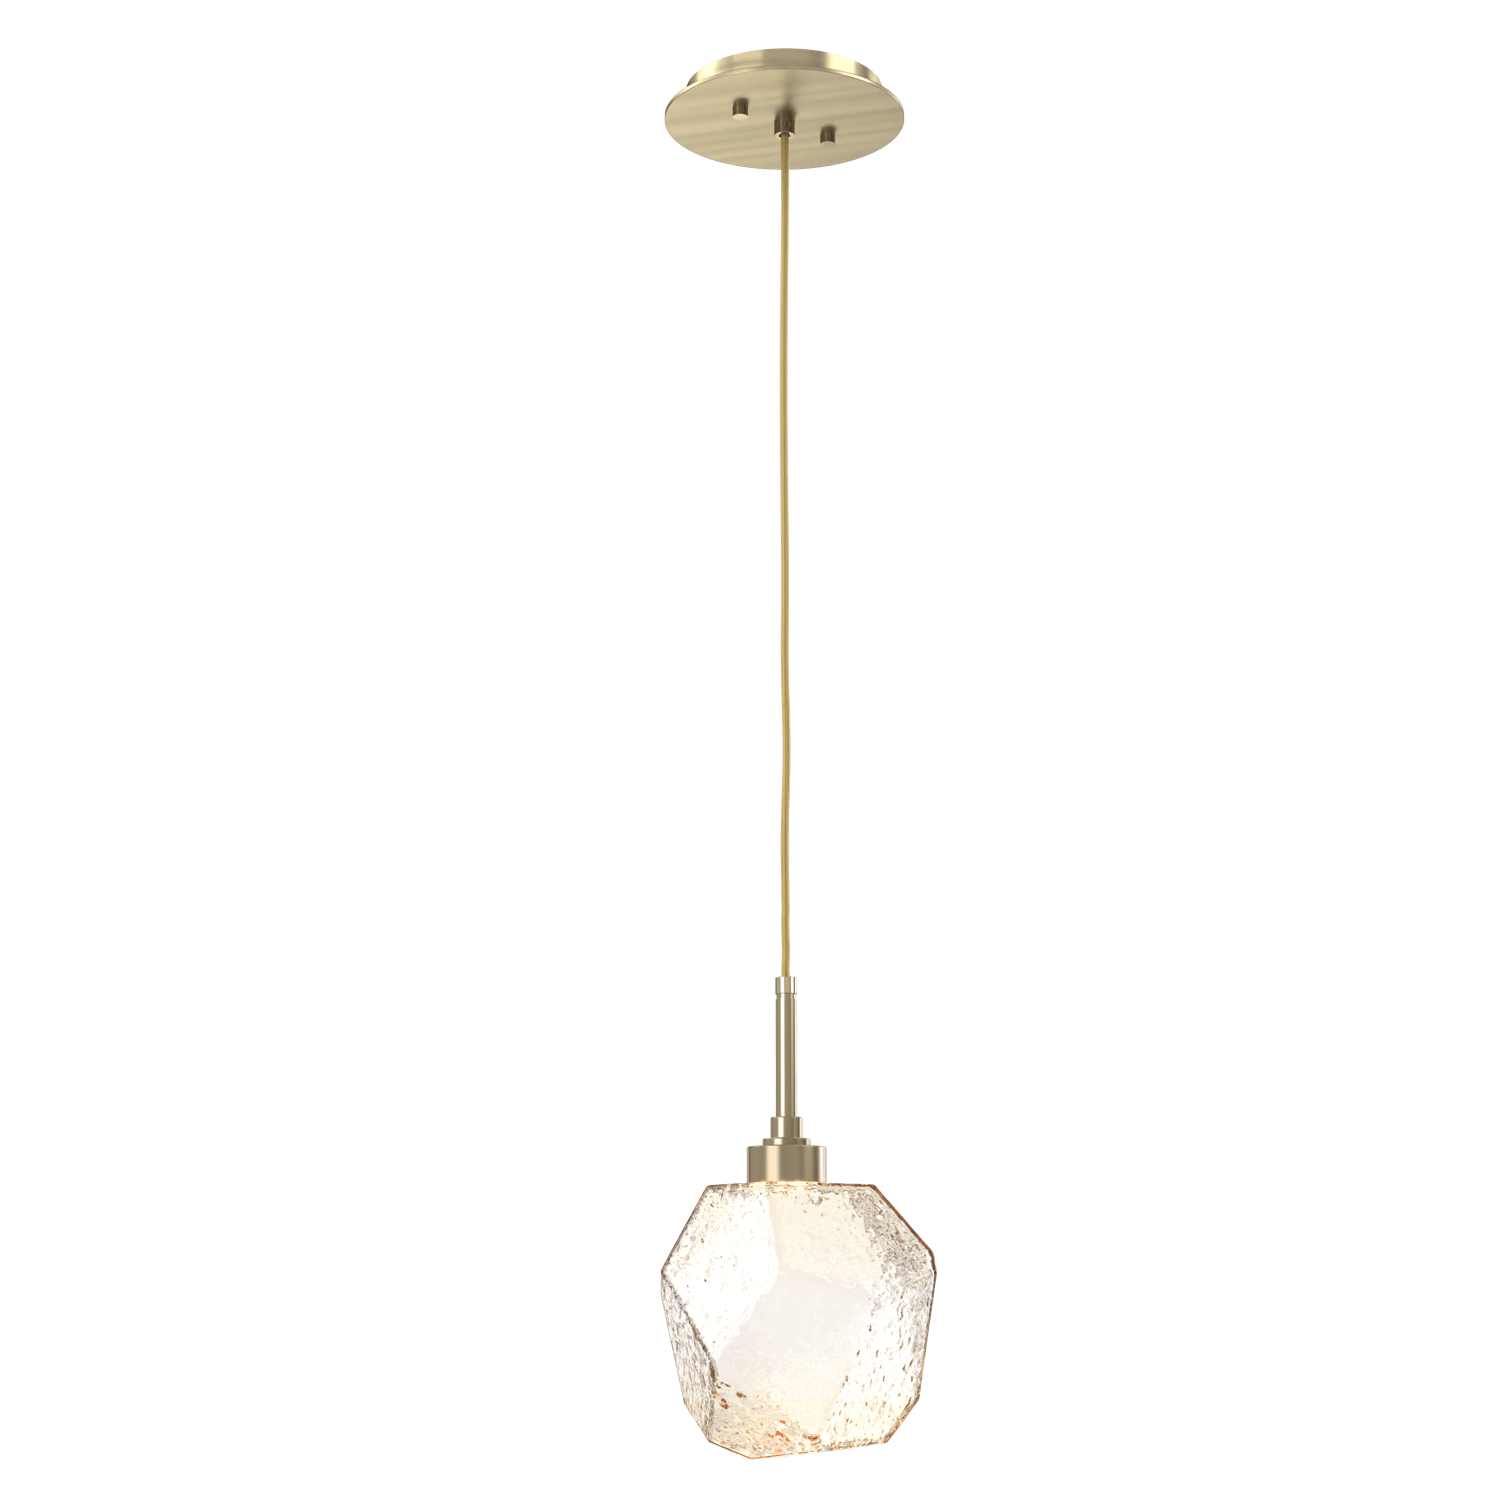 LAB0039-01-HB-A-Hammerton-Studio-Gem-pendant-light-with-heritage-brass-finish-and-amber-blown-glass-shades-and-LED-lamping